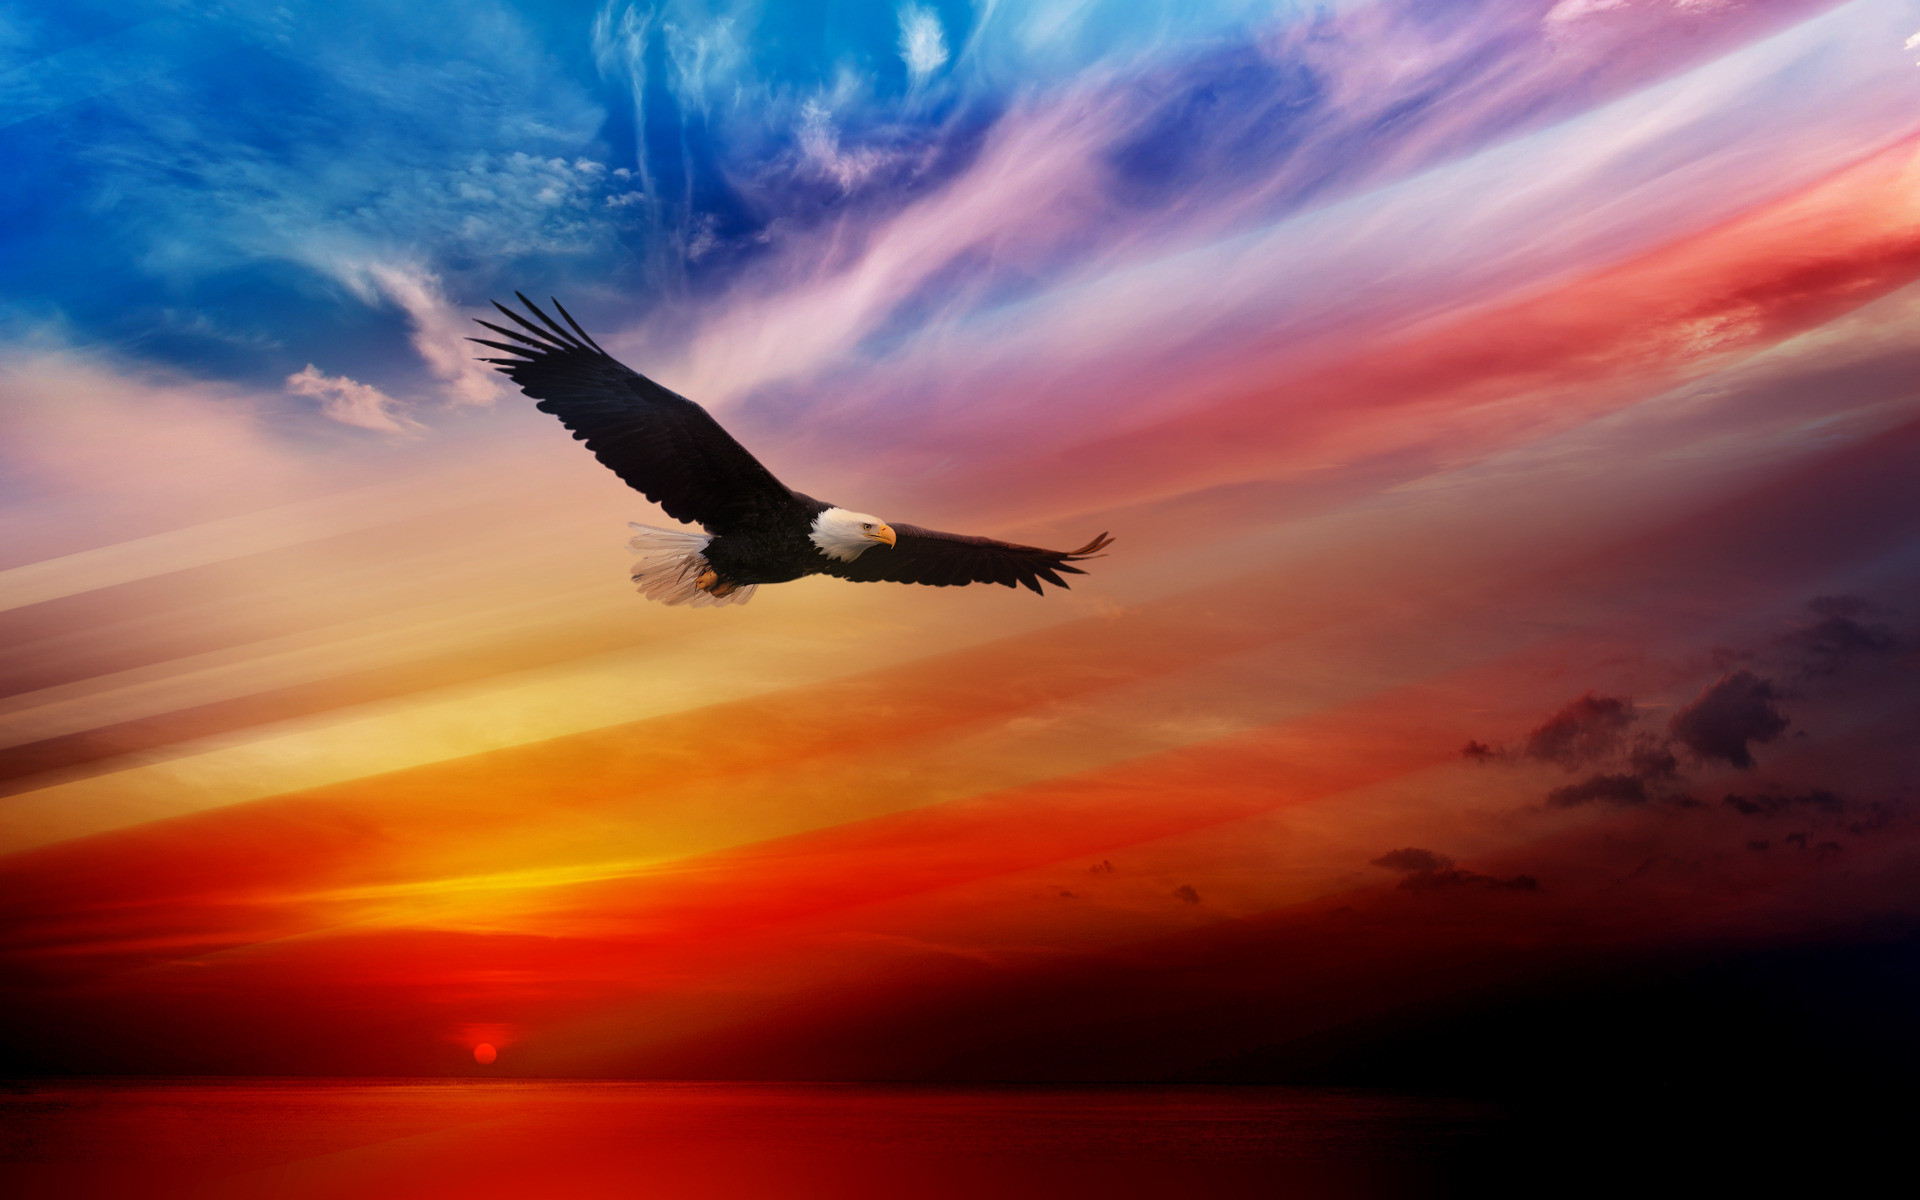 HD wallpaper The Great Eagle Comm lovely cool warm amazing  fascinating  Wallpaper Flare